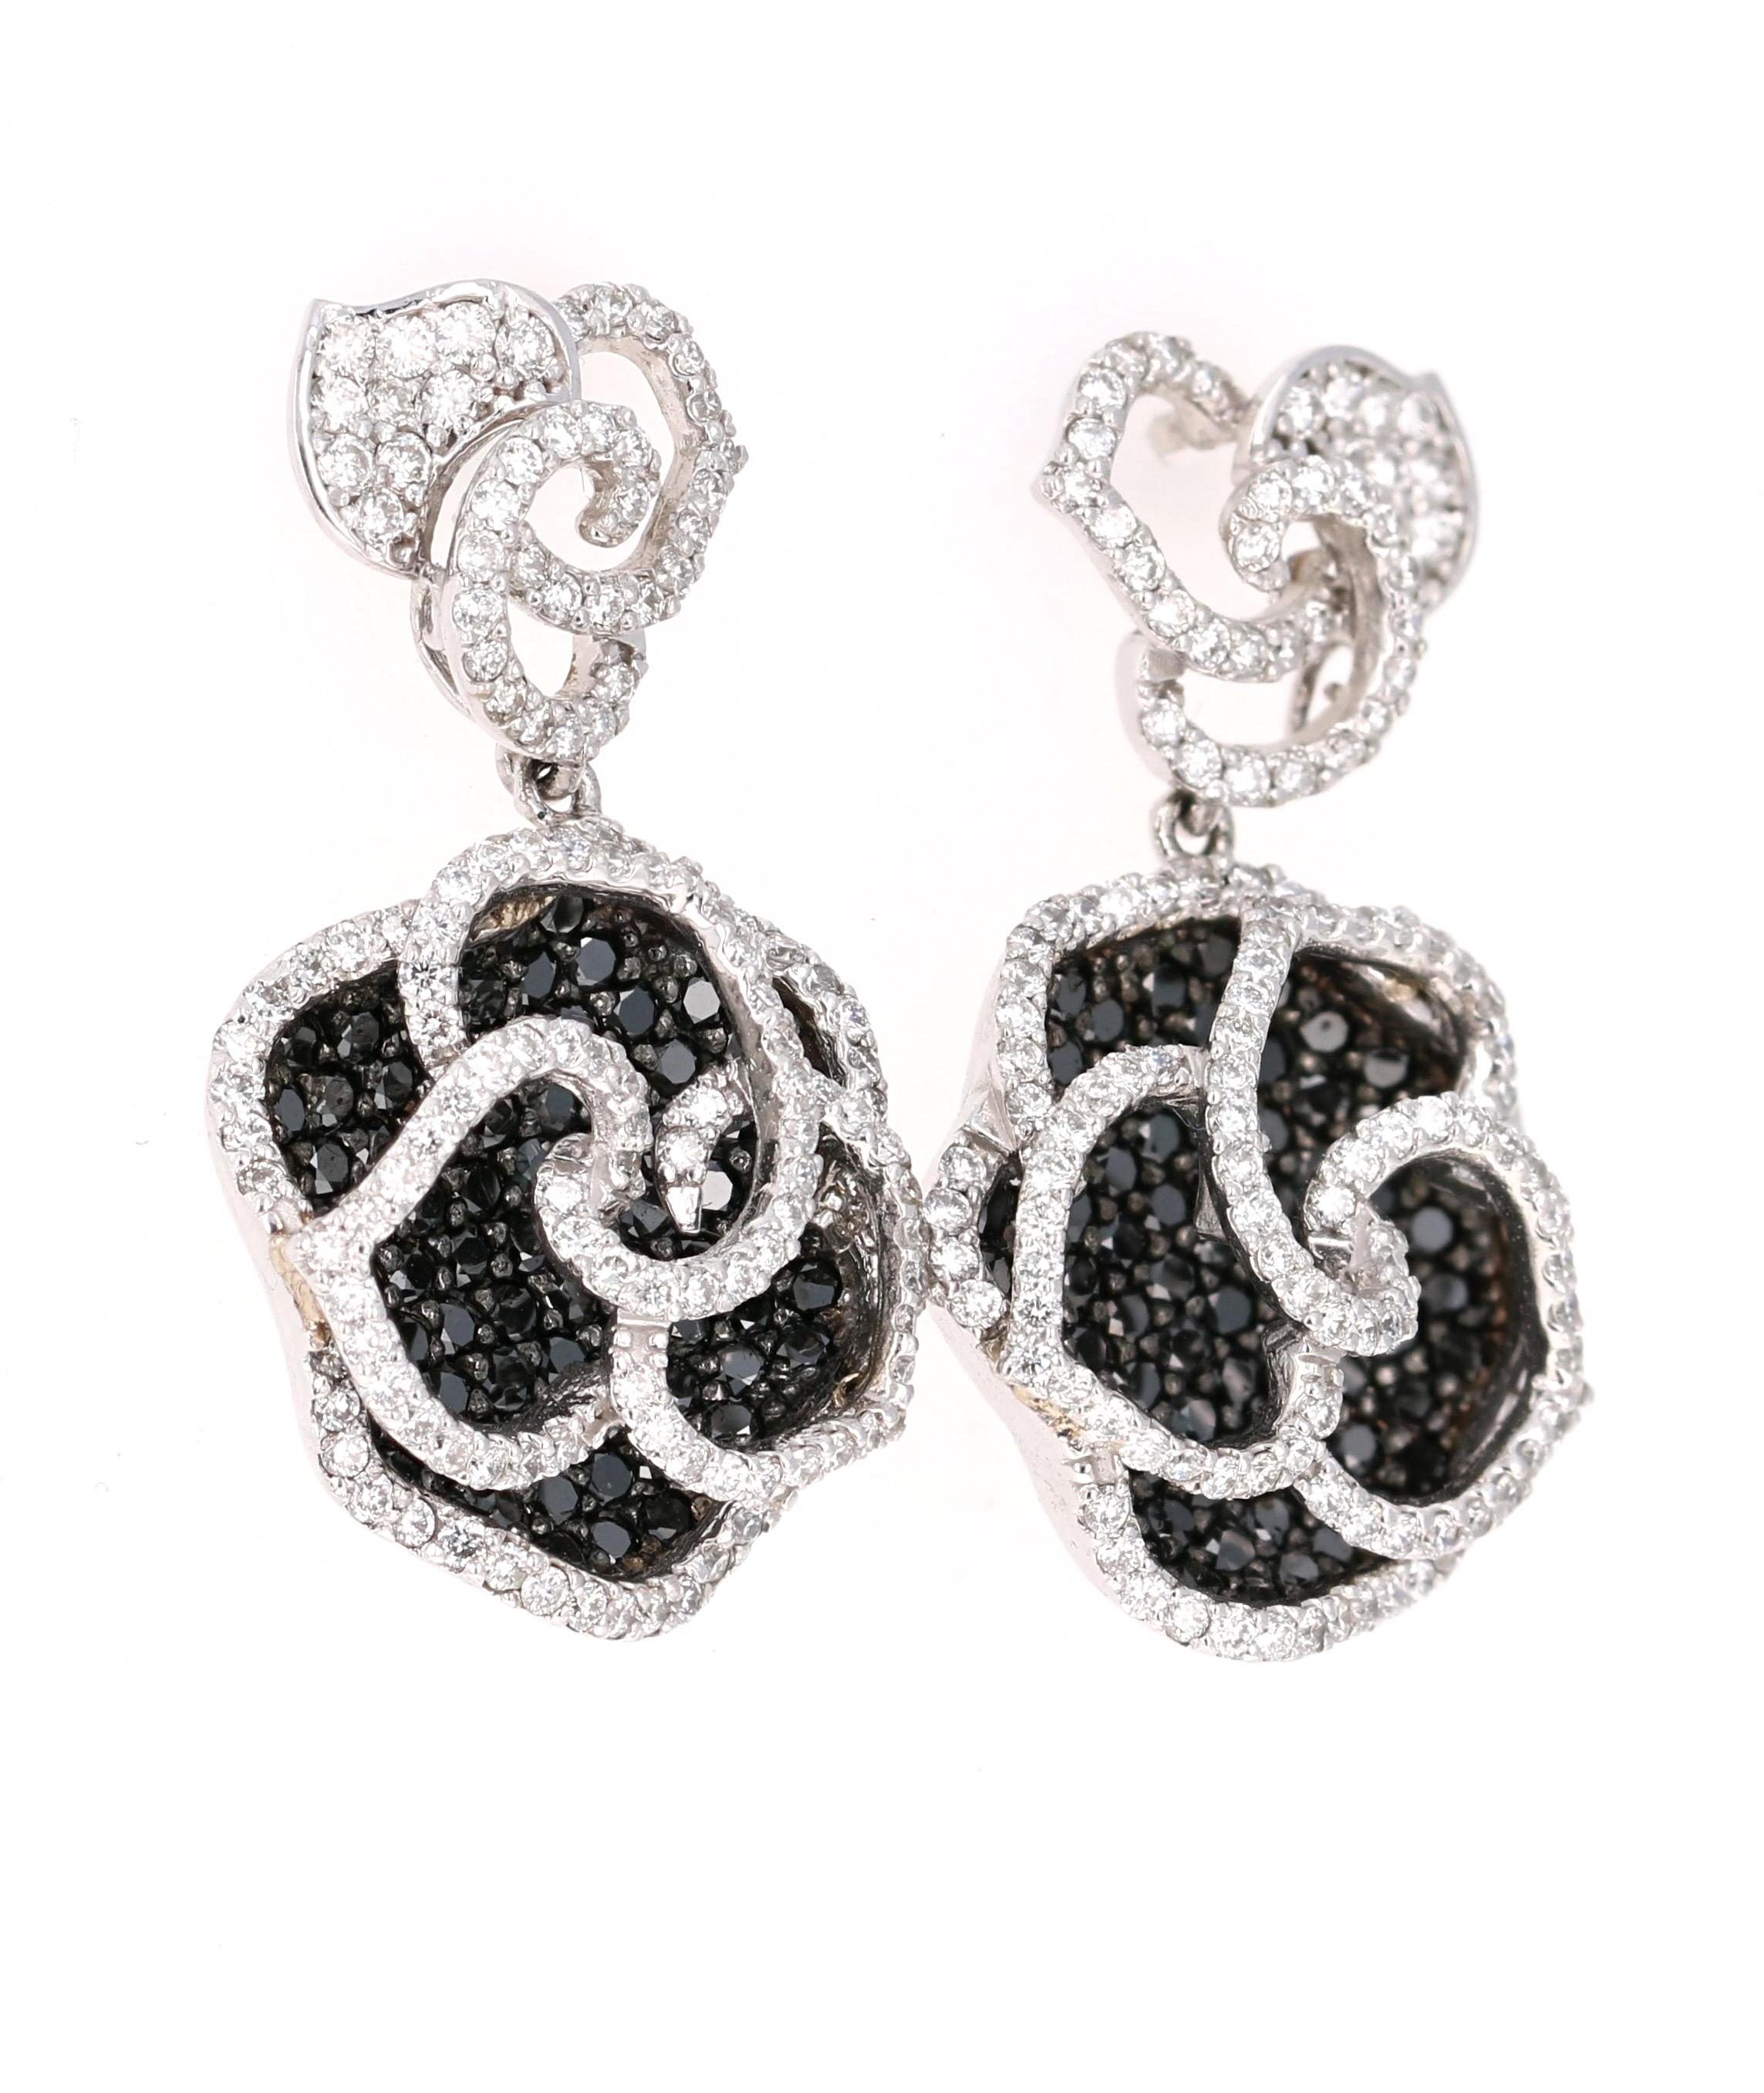 Stunning Black and White Diamond Earrings that are nothing less than a Statement! Beautiful Black Roses for your jewelry collection!

The ring is adorned with Natural Black Diamonds that weigh 1.98 Carats as well as Natural Round Cut Diamonds that